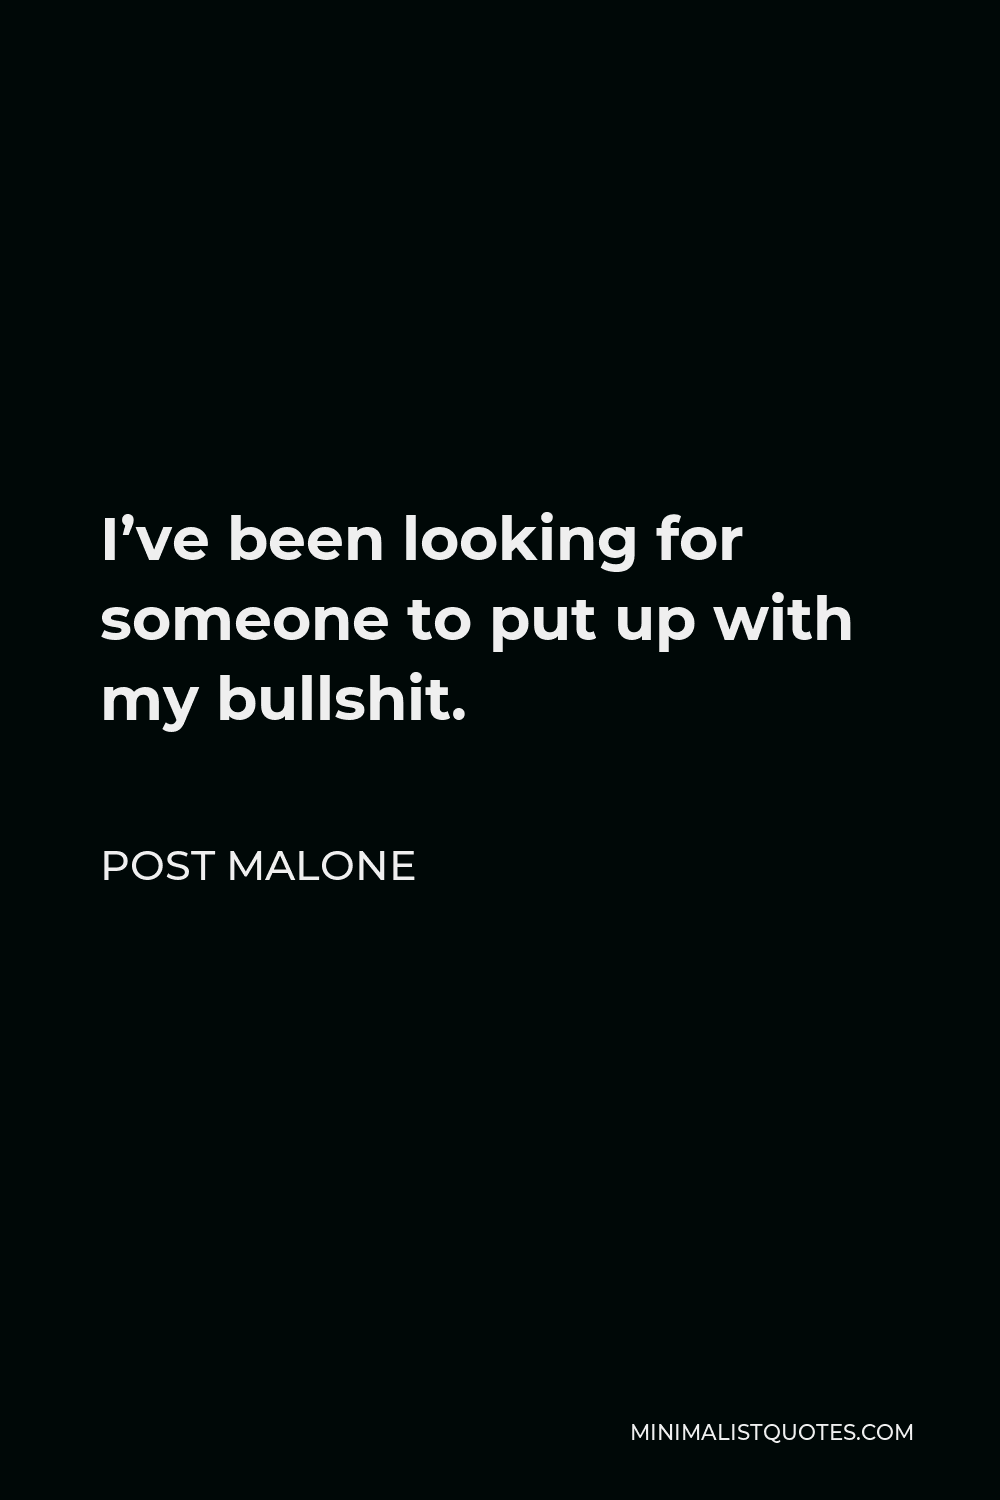 Post Malone Quote - I’ve been looking for someone to put up with my bullshit.